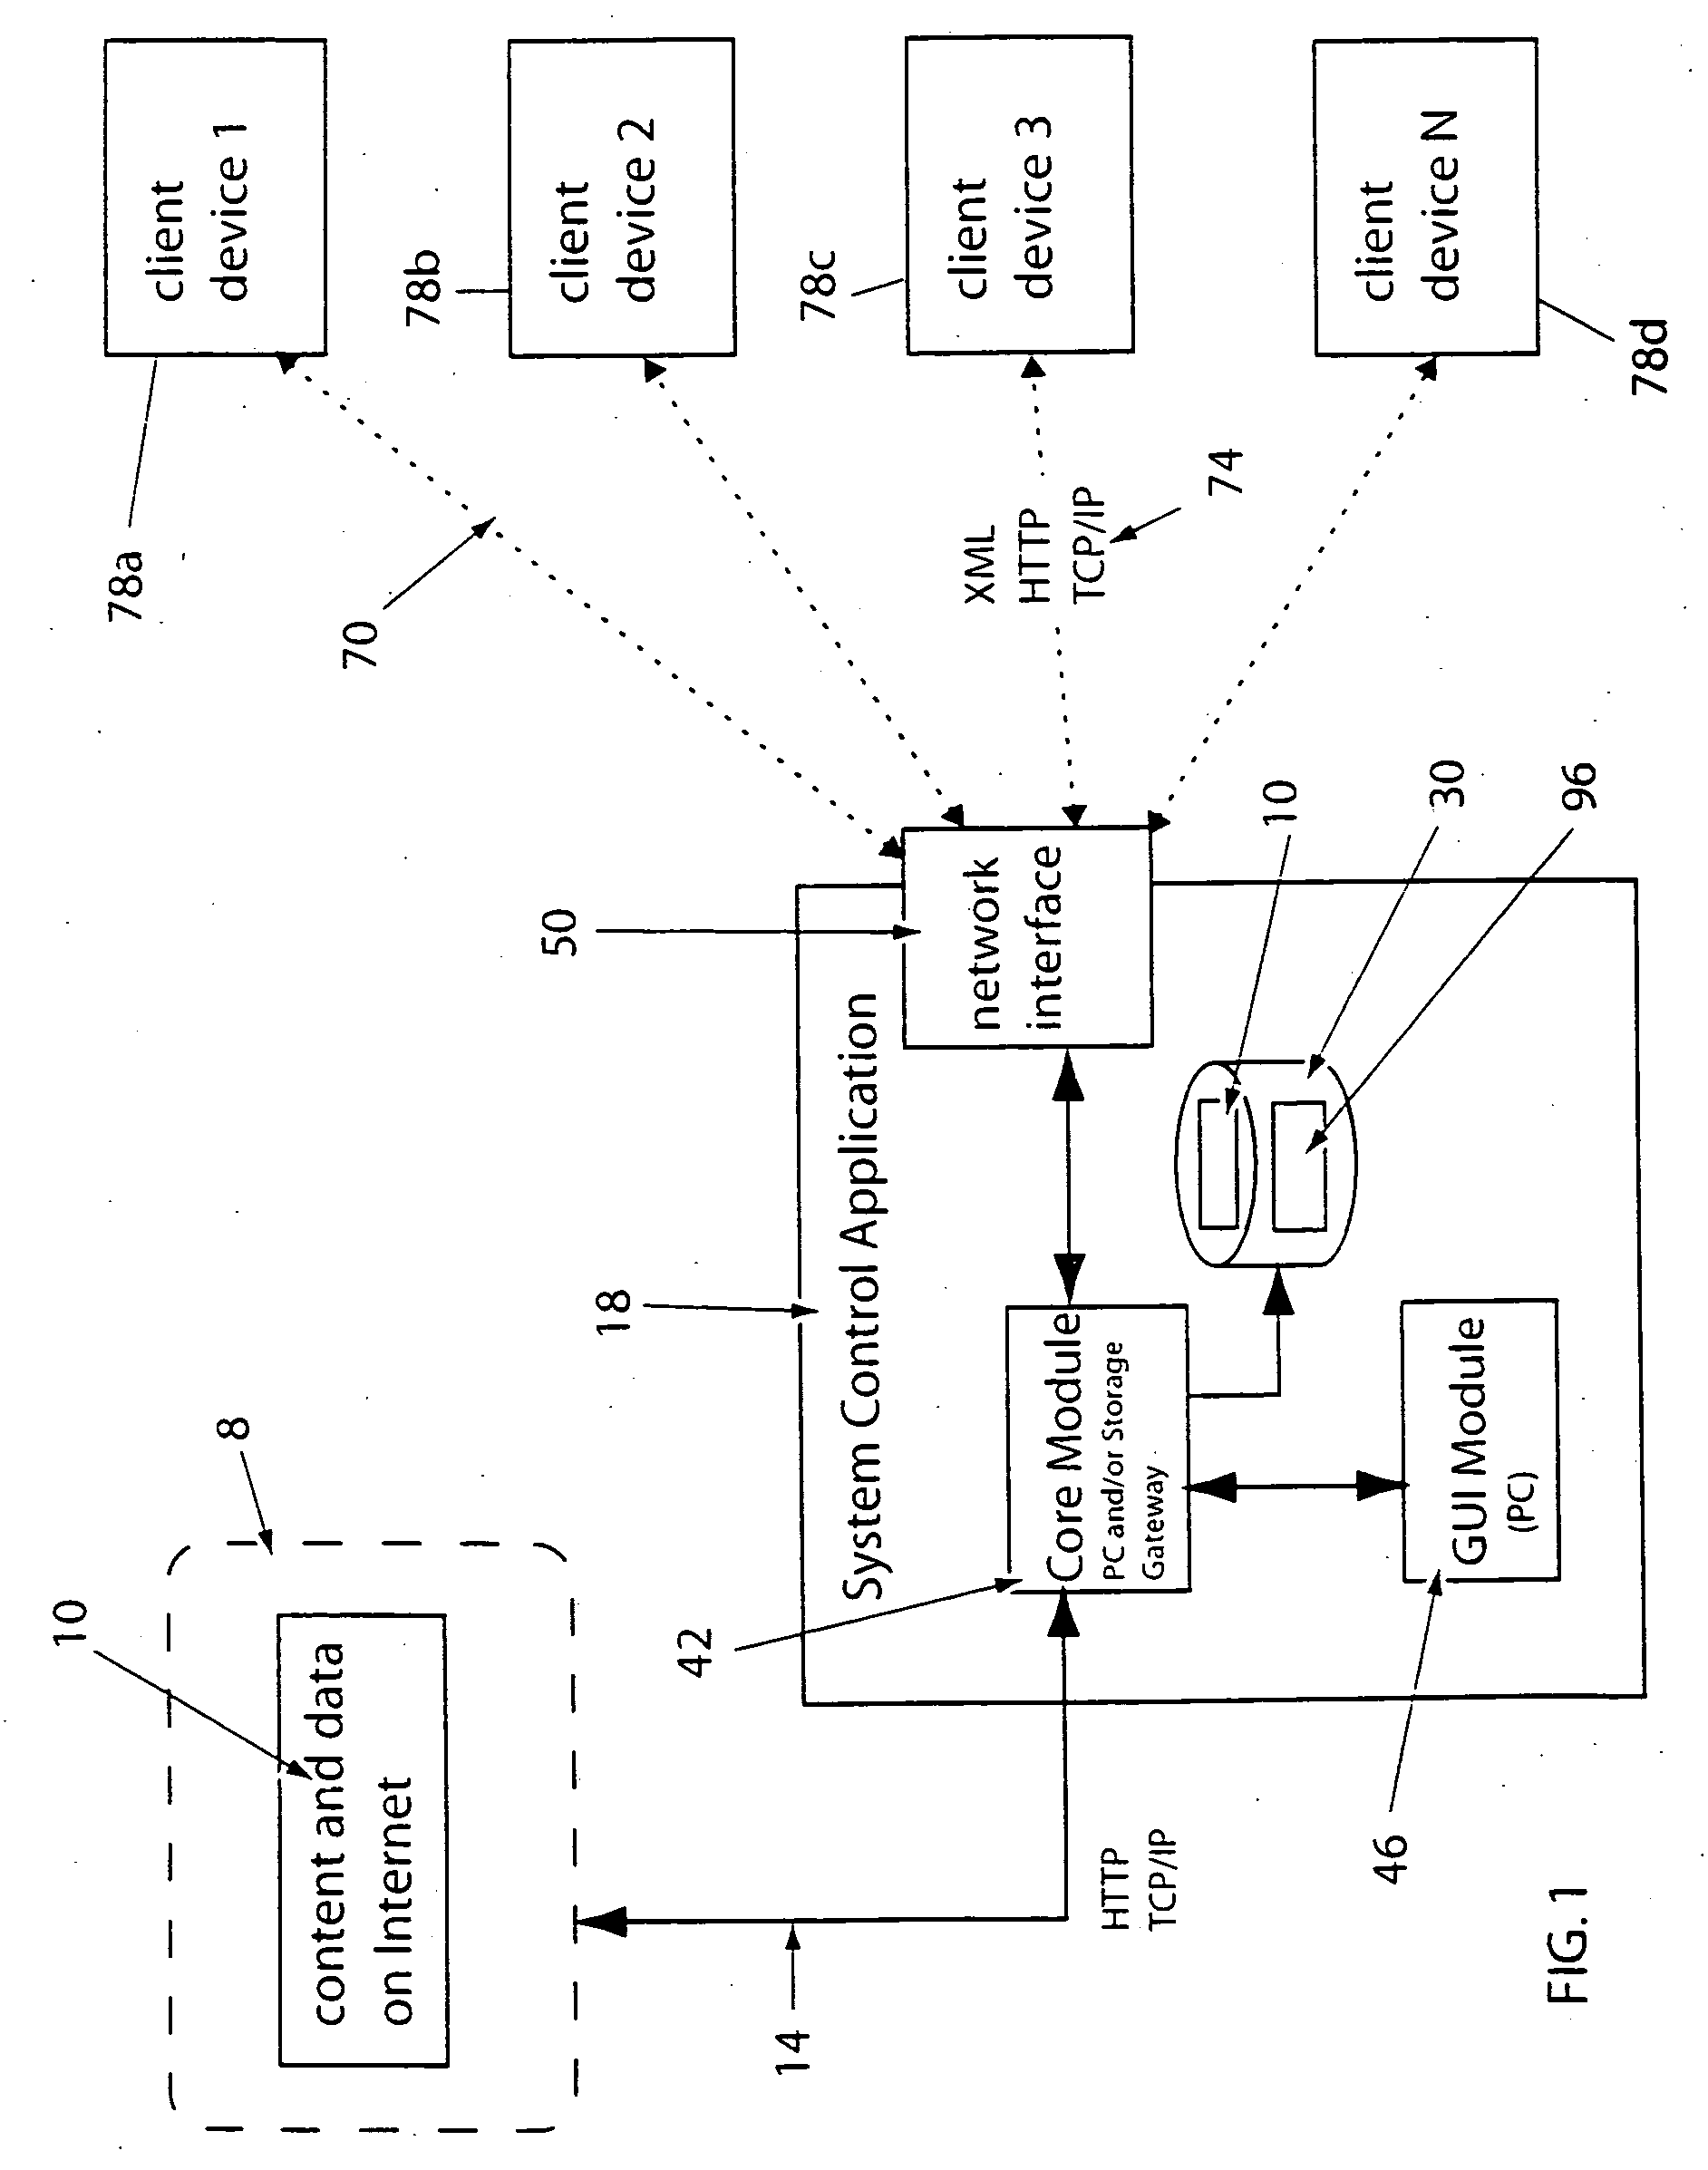 System for providing content, management, and interactivity for thin client devices